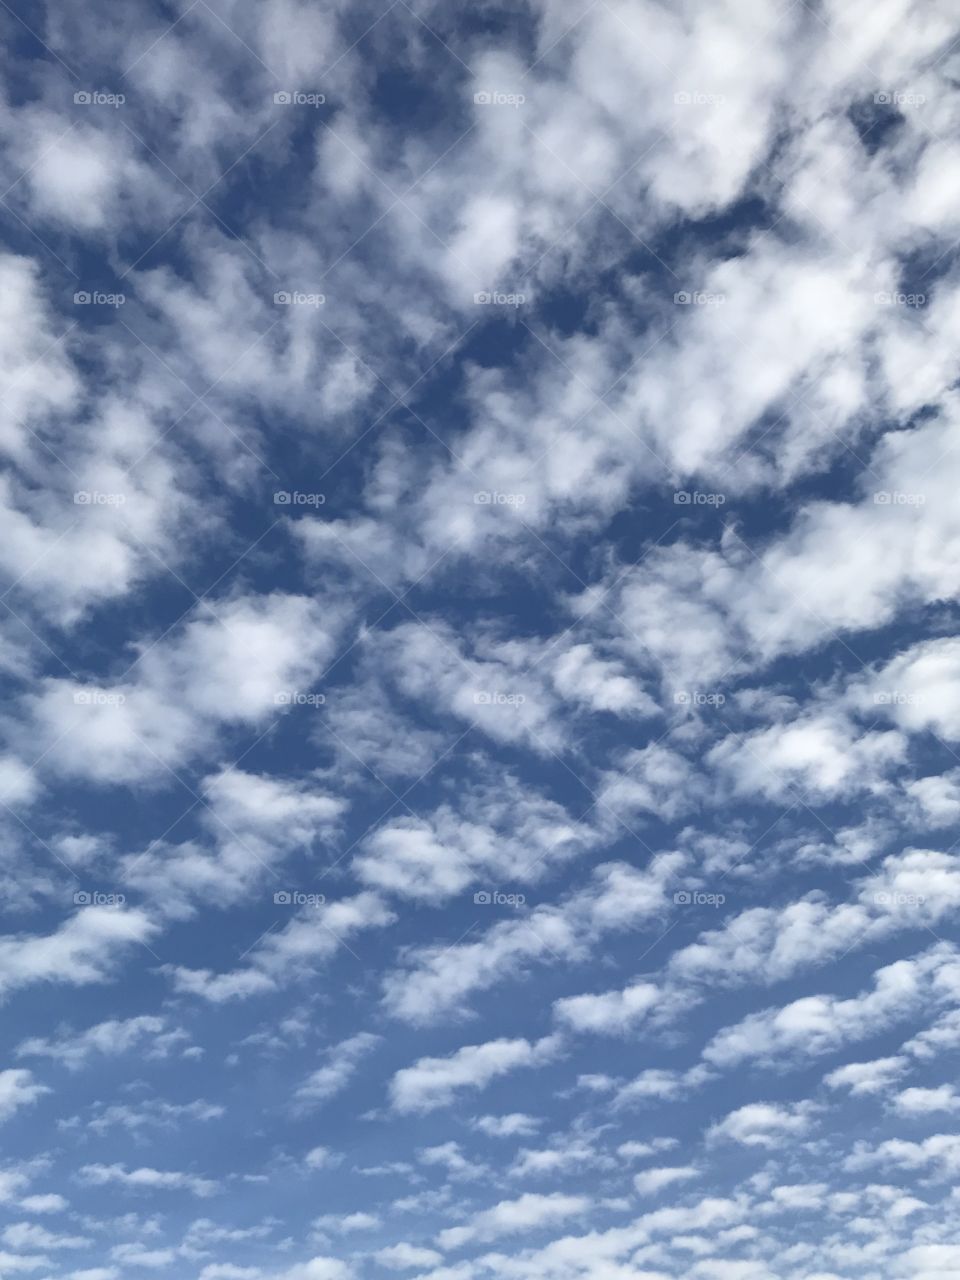 A Blue Sky With Rows Of Opaque Clouds